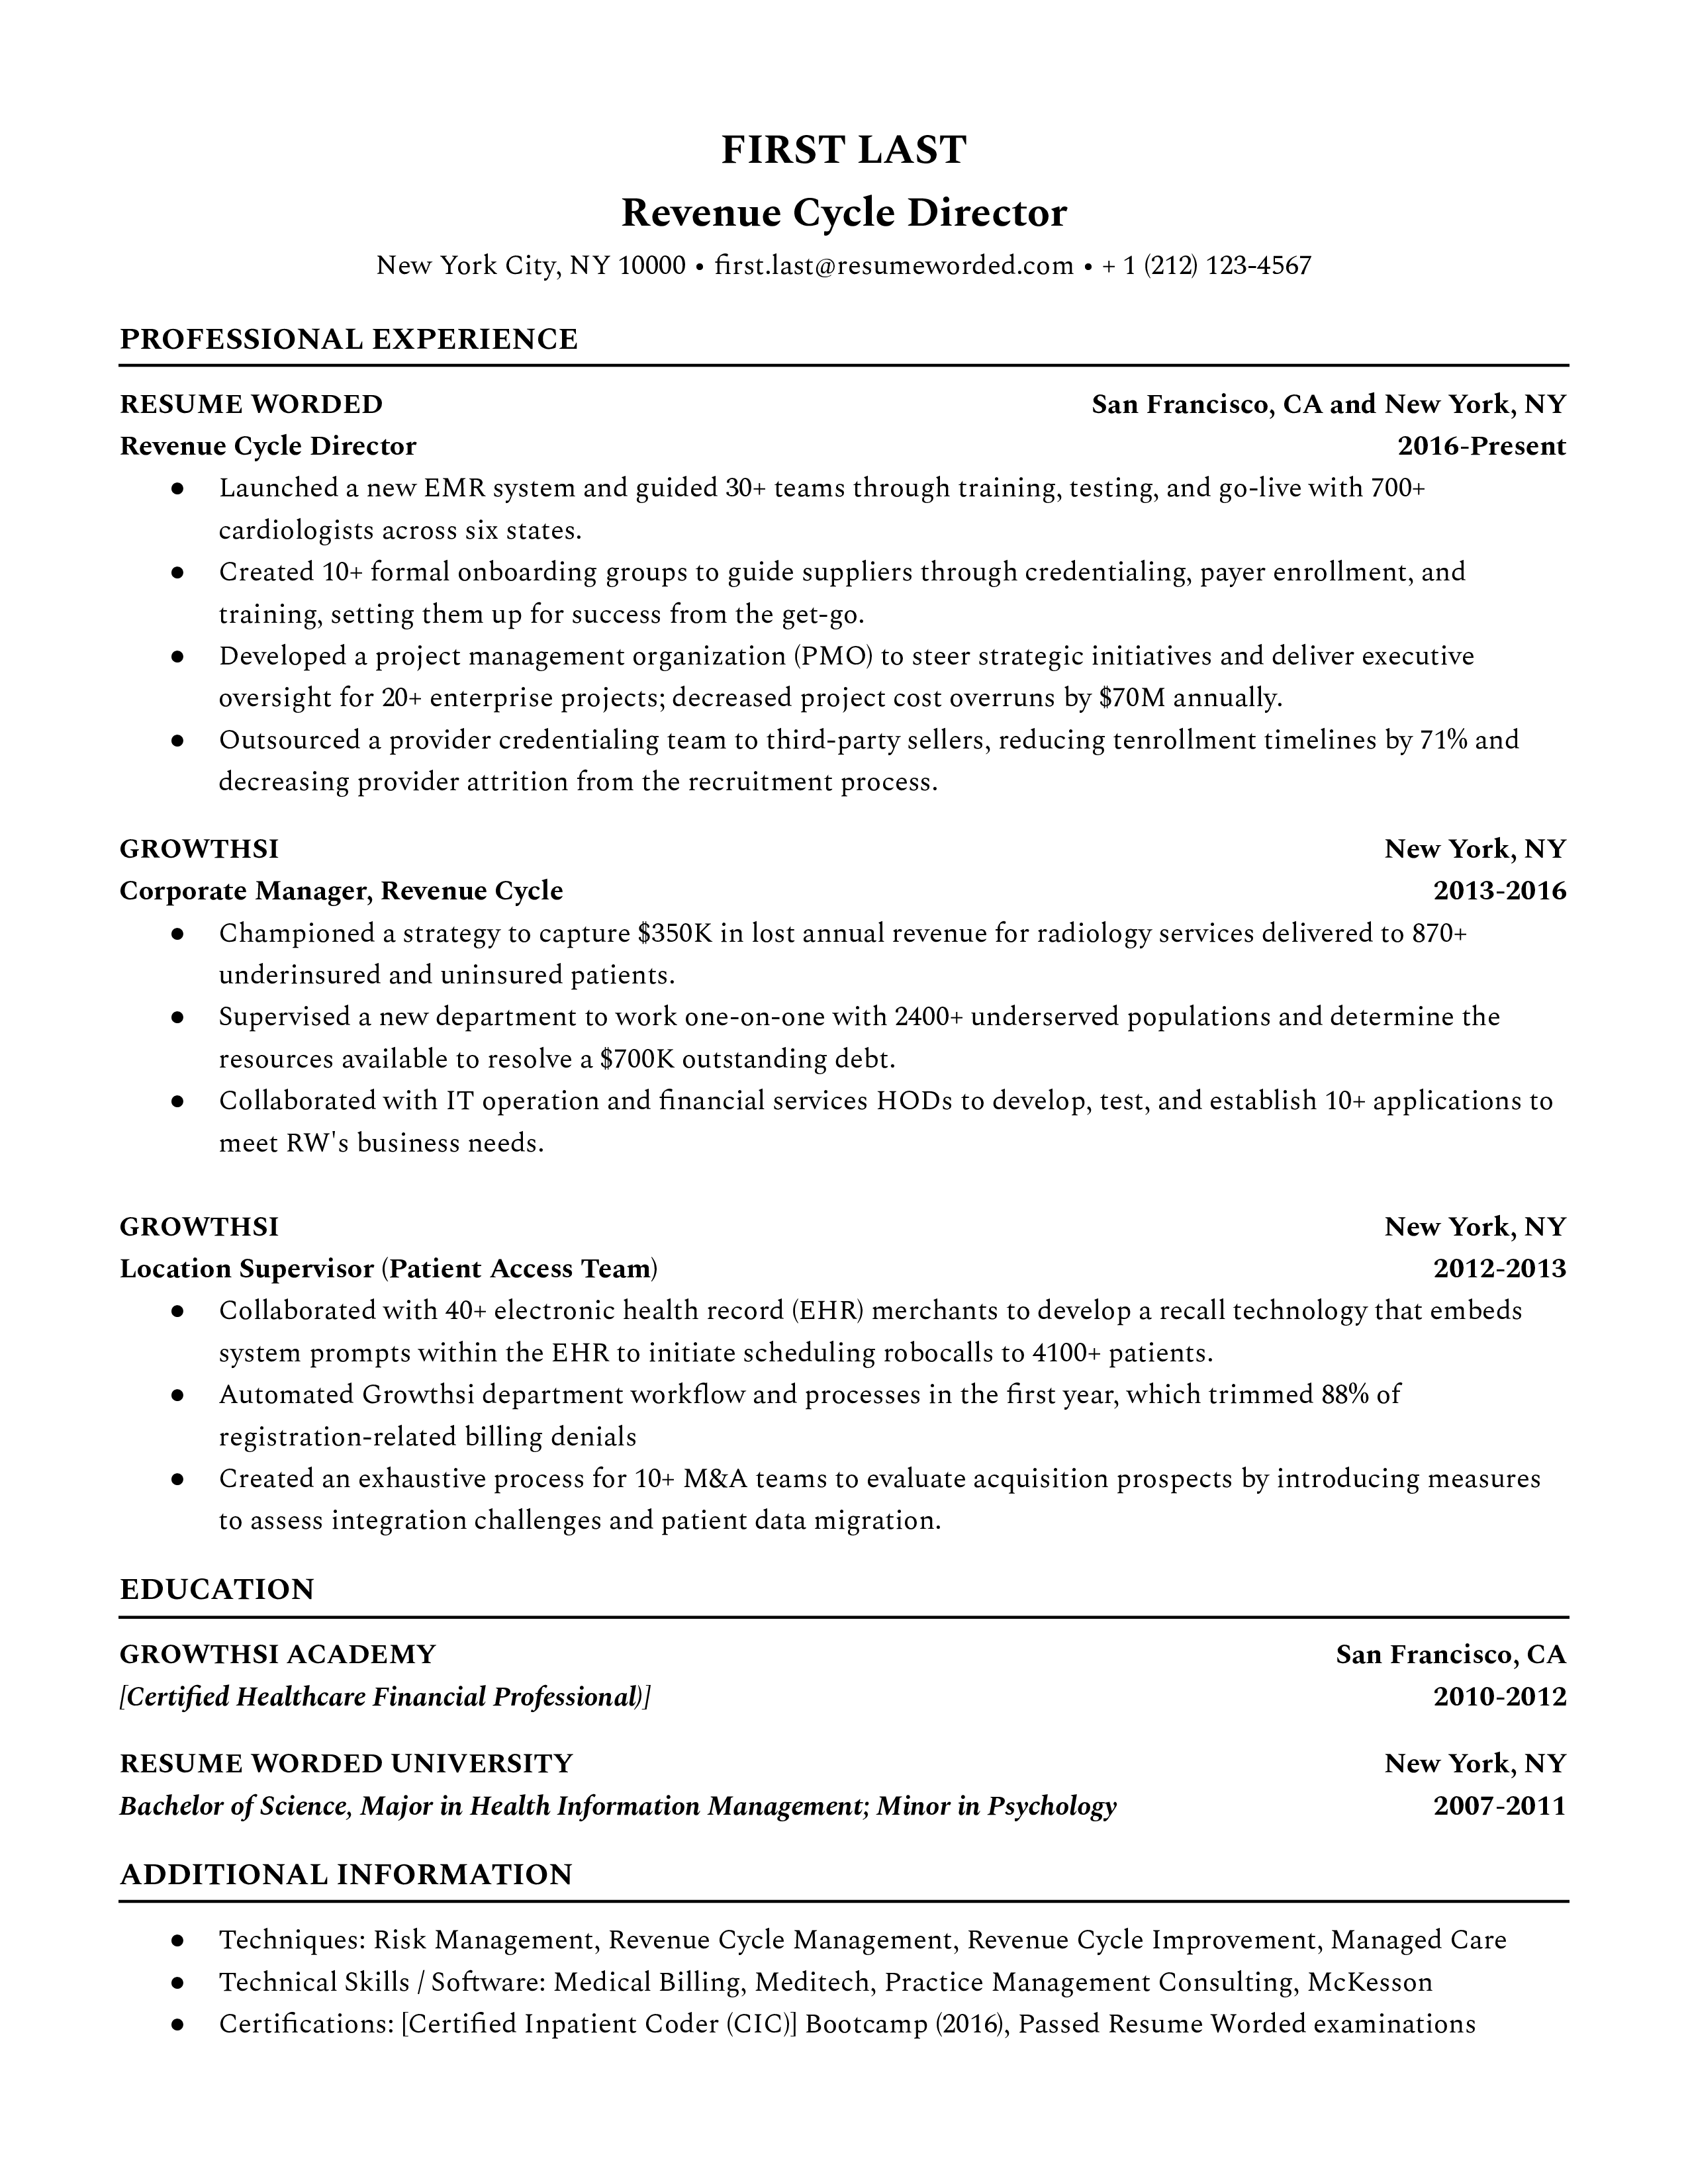 A revenue cycle director resume template that highlights management experience in the RCM field.